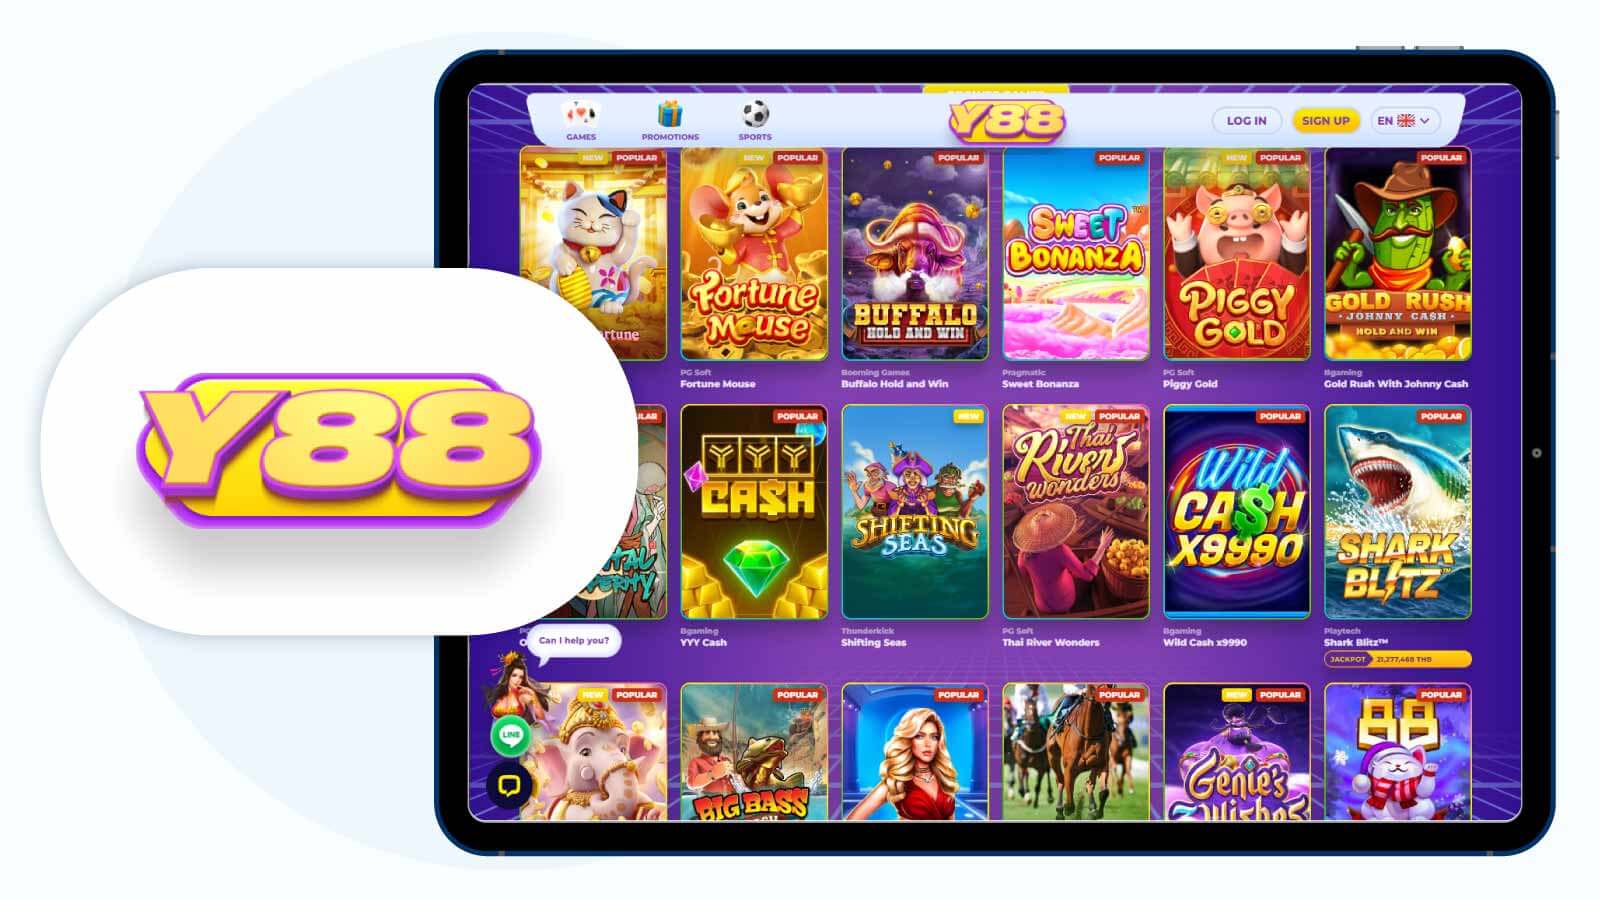 Discover-10-Free-Spins-No-Deposit-at-a-Top-Crypto-Site-Y88-Casino